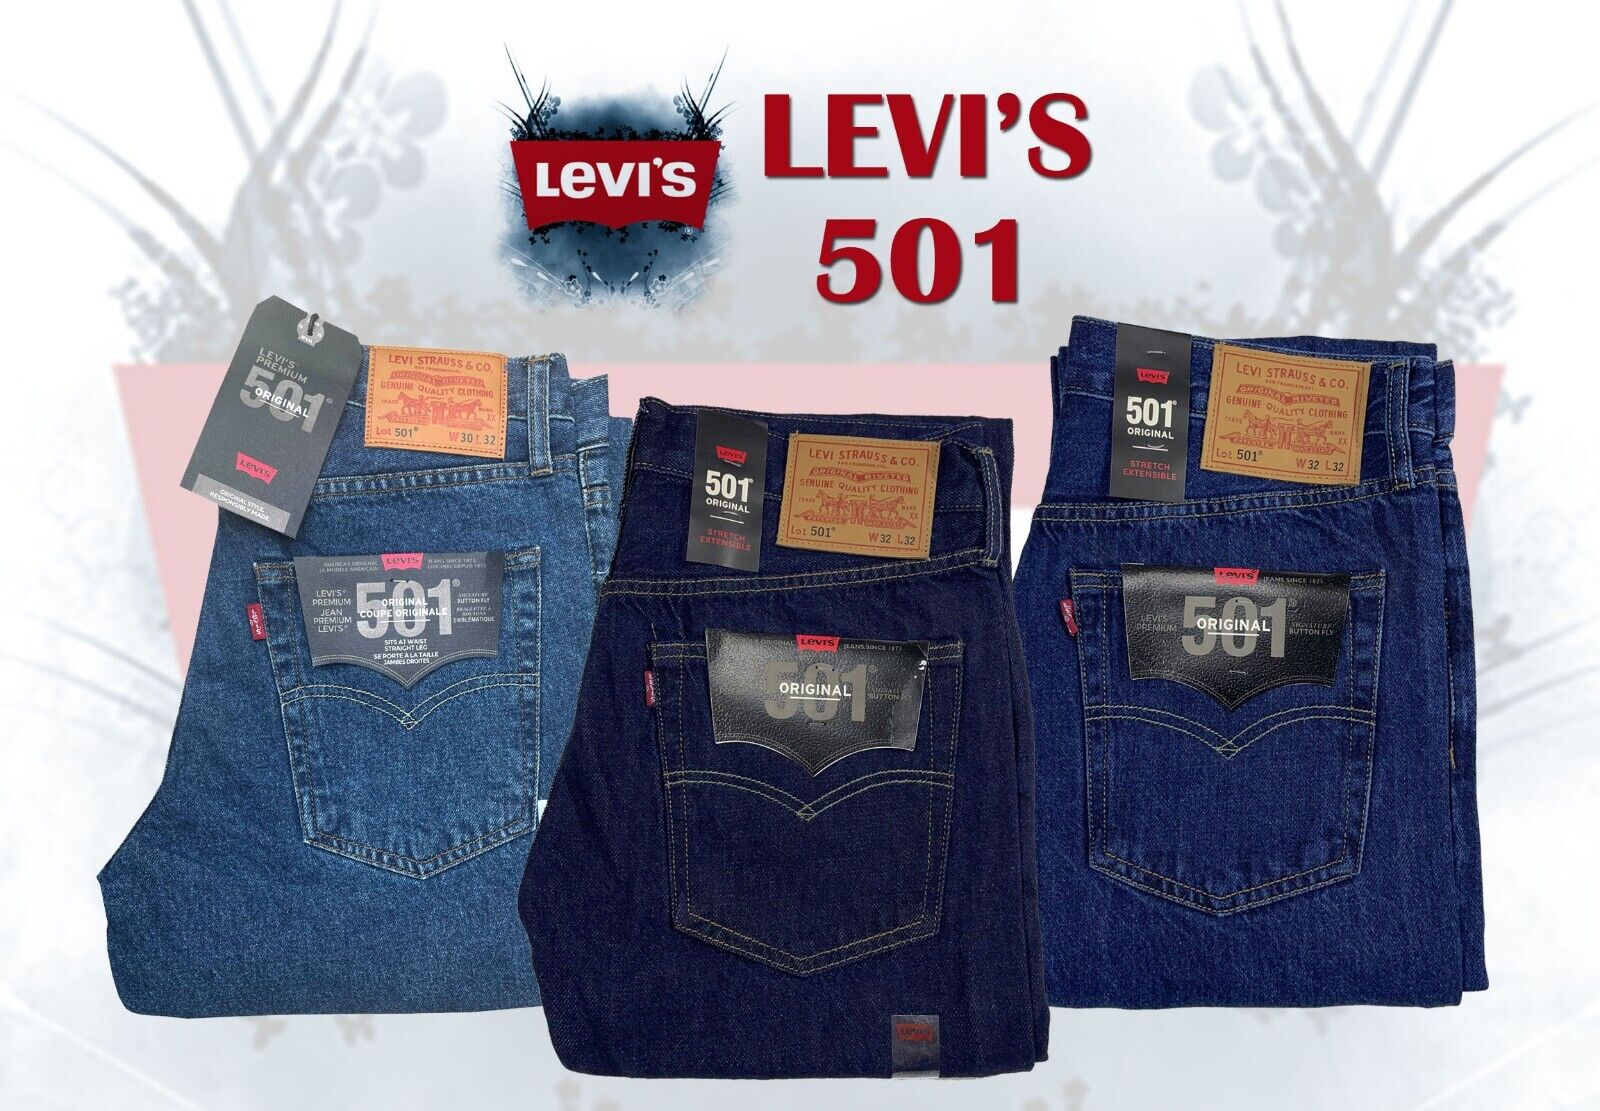 Looking to Buy Levi